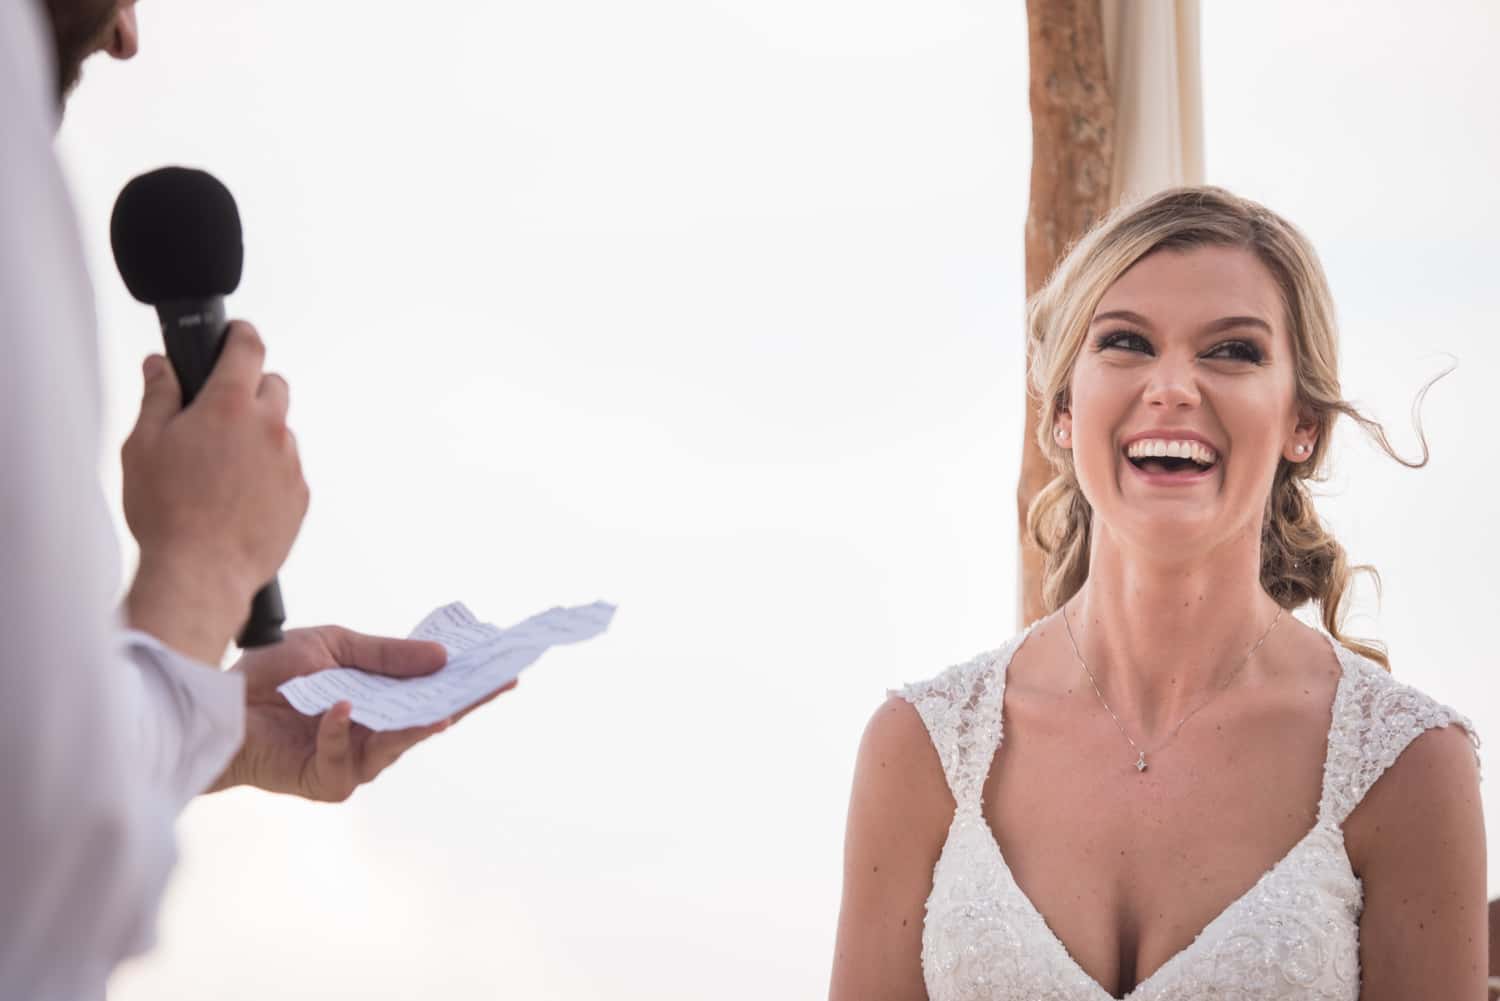 Bride smiling while groom reads vows